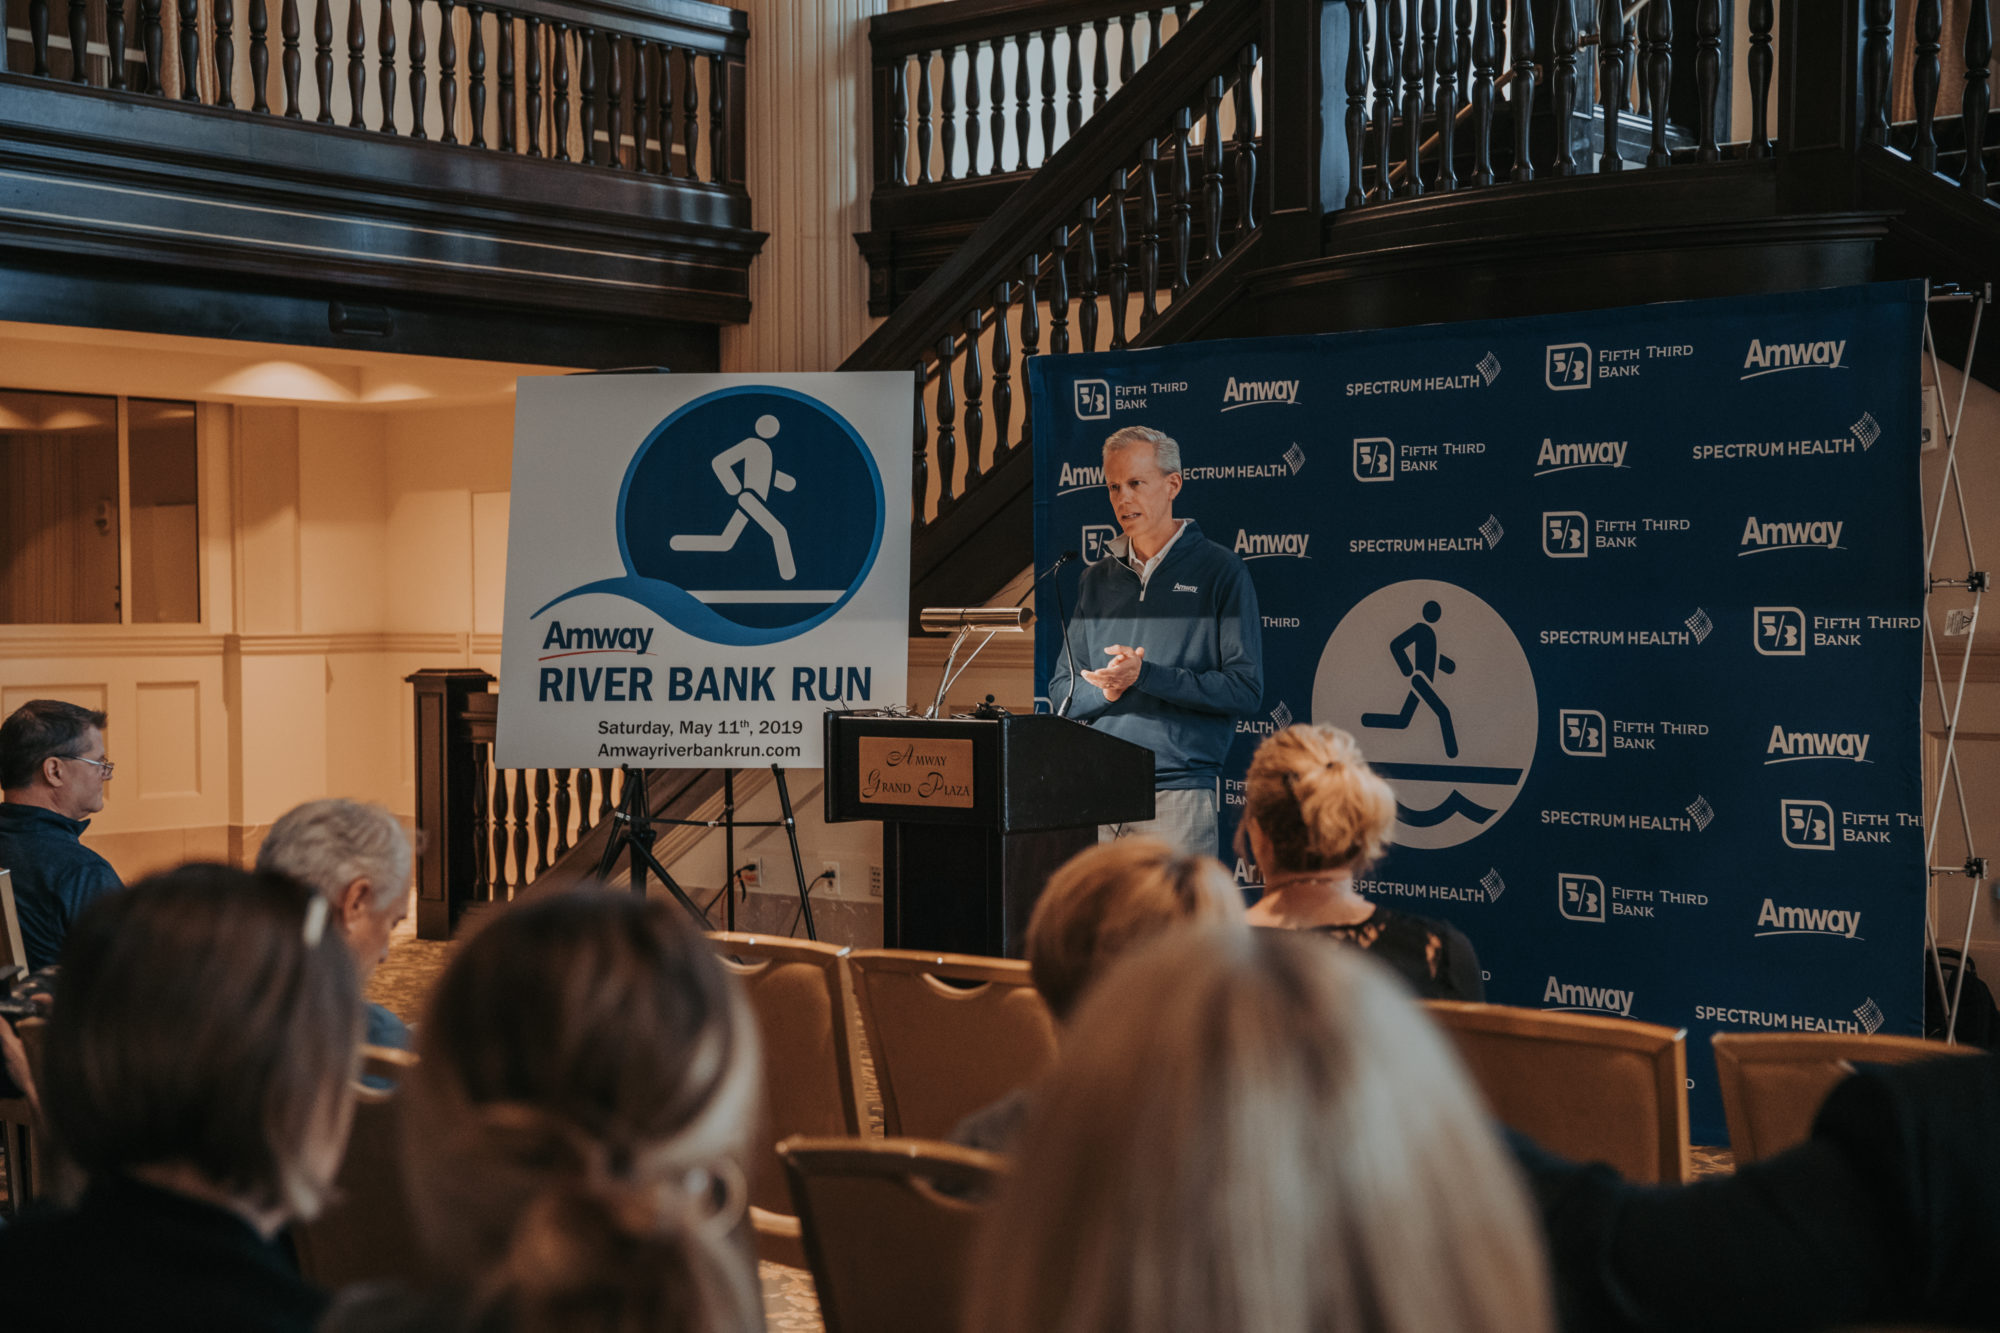 Amway Becomes Title Sponsor of River Bank Run